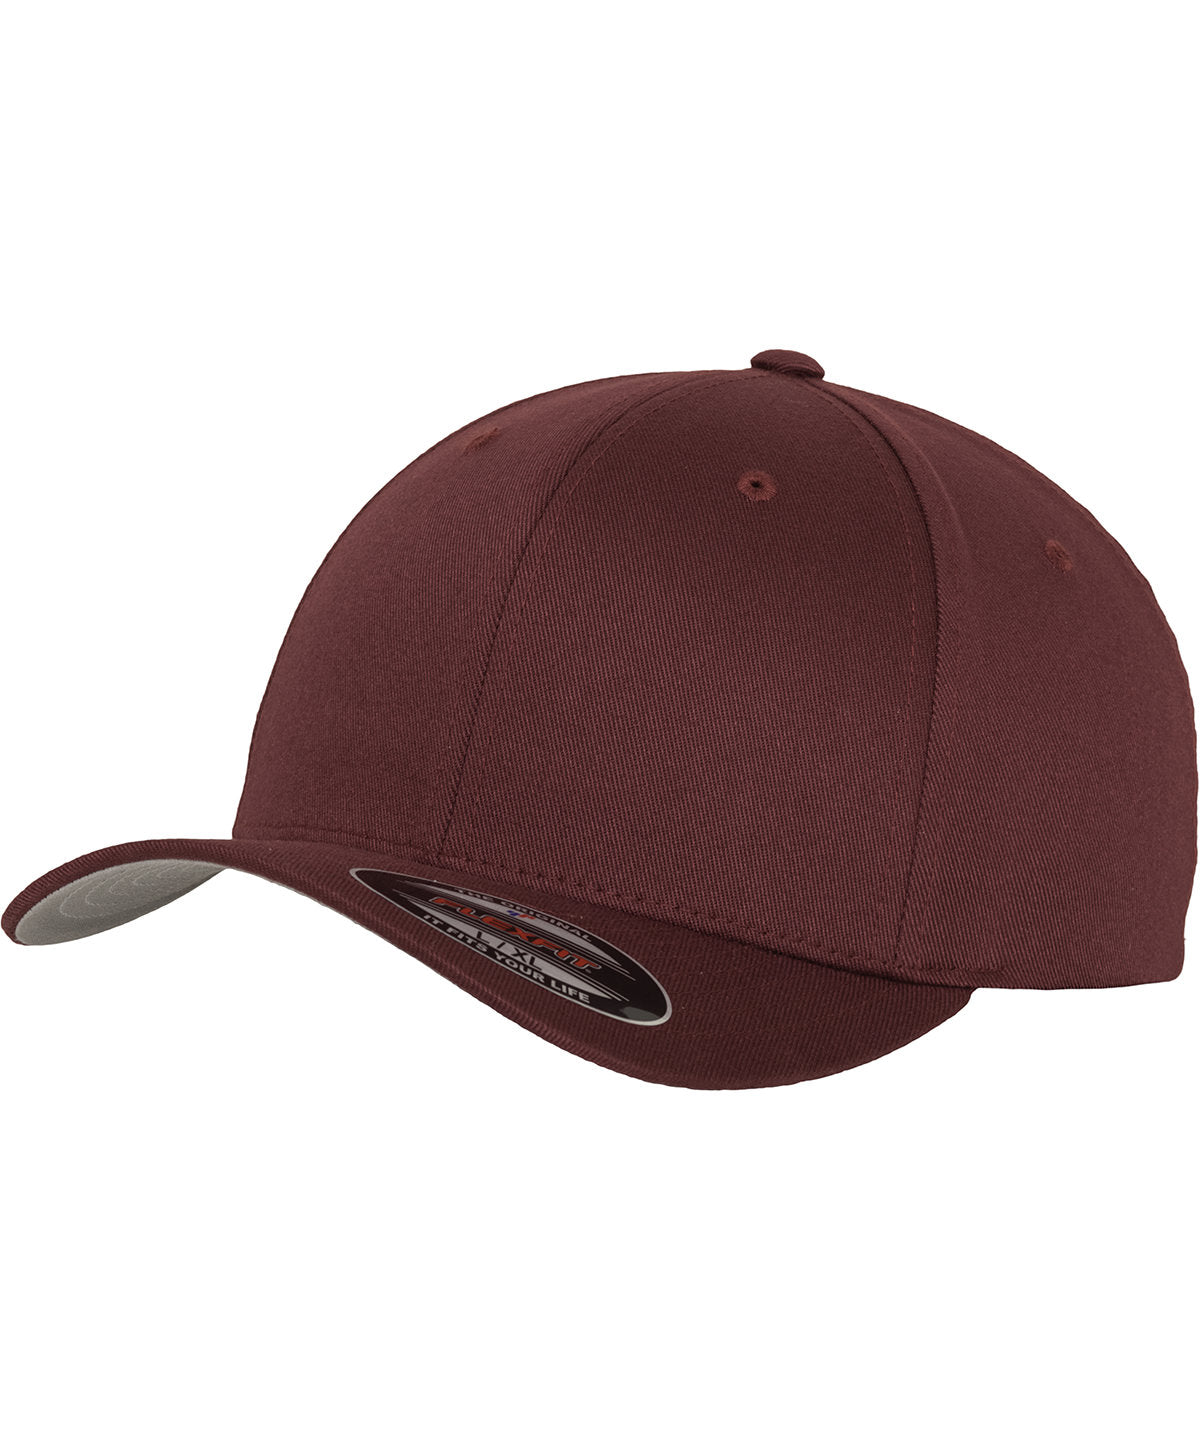 Maroon - Flexfit fitted baseball cap (6277) Caps Flexfit by Yupoong 2022 Spring Edit, Headwear, Must Haves, New Colours for 2023, Rebrandable, Summer Accessories Schoolwear Centres